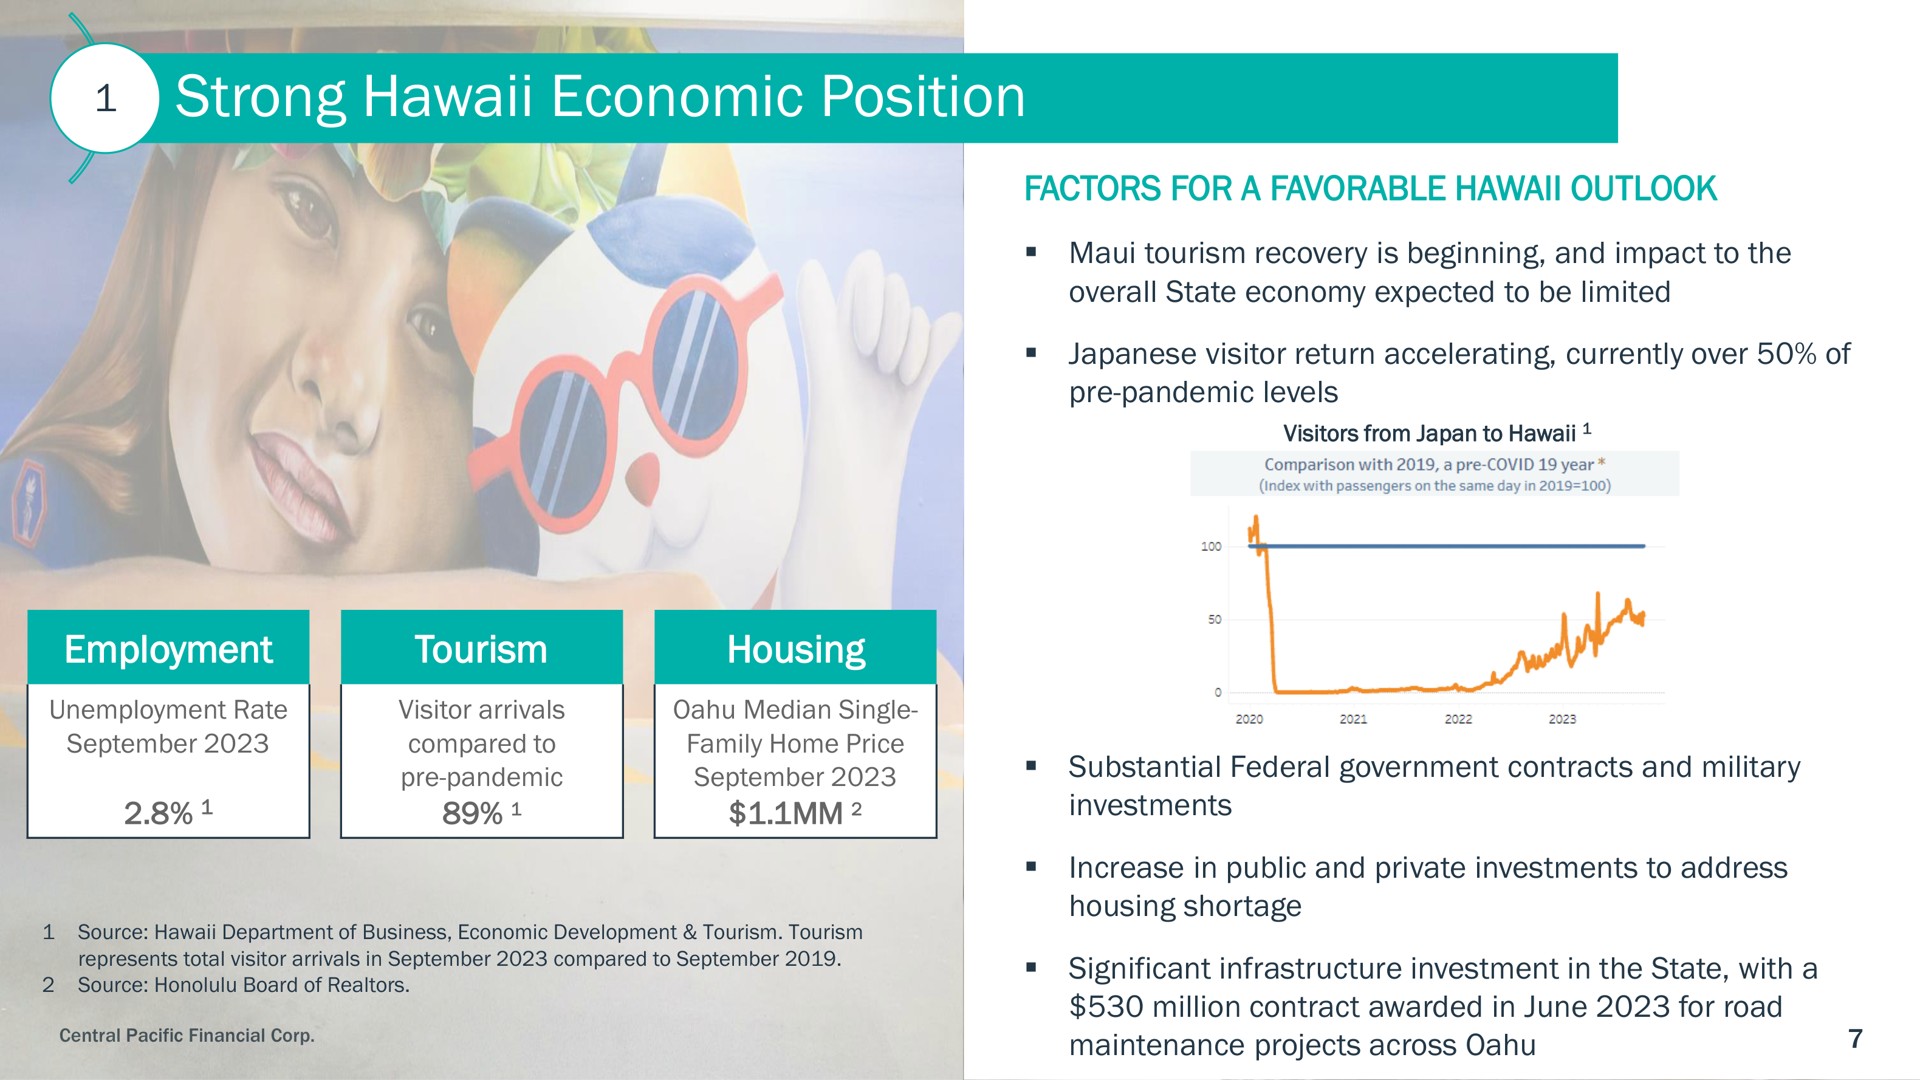 strong economic position | Central Pacific Financial